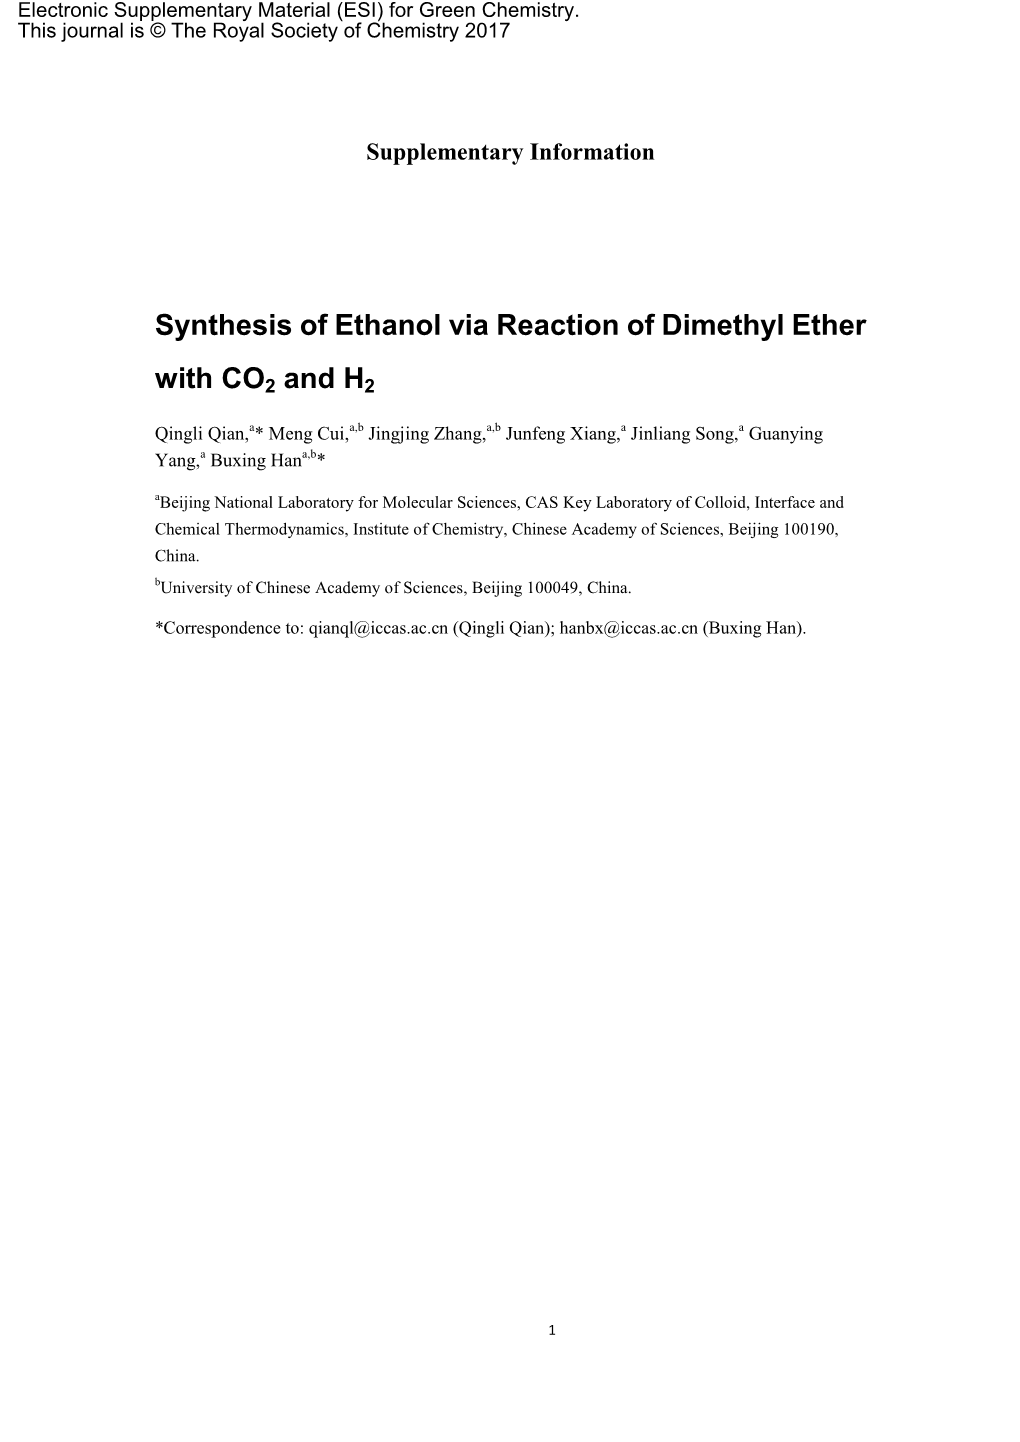 Synthesis of Ethanol Via Reaction of Dimethyl Ether with CO2 and H2